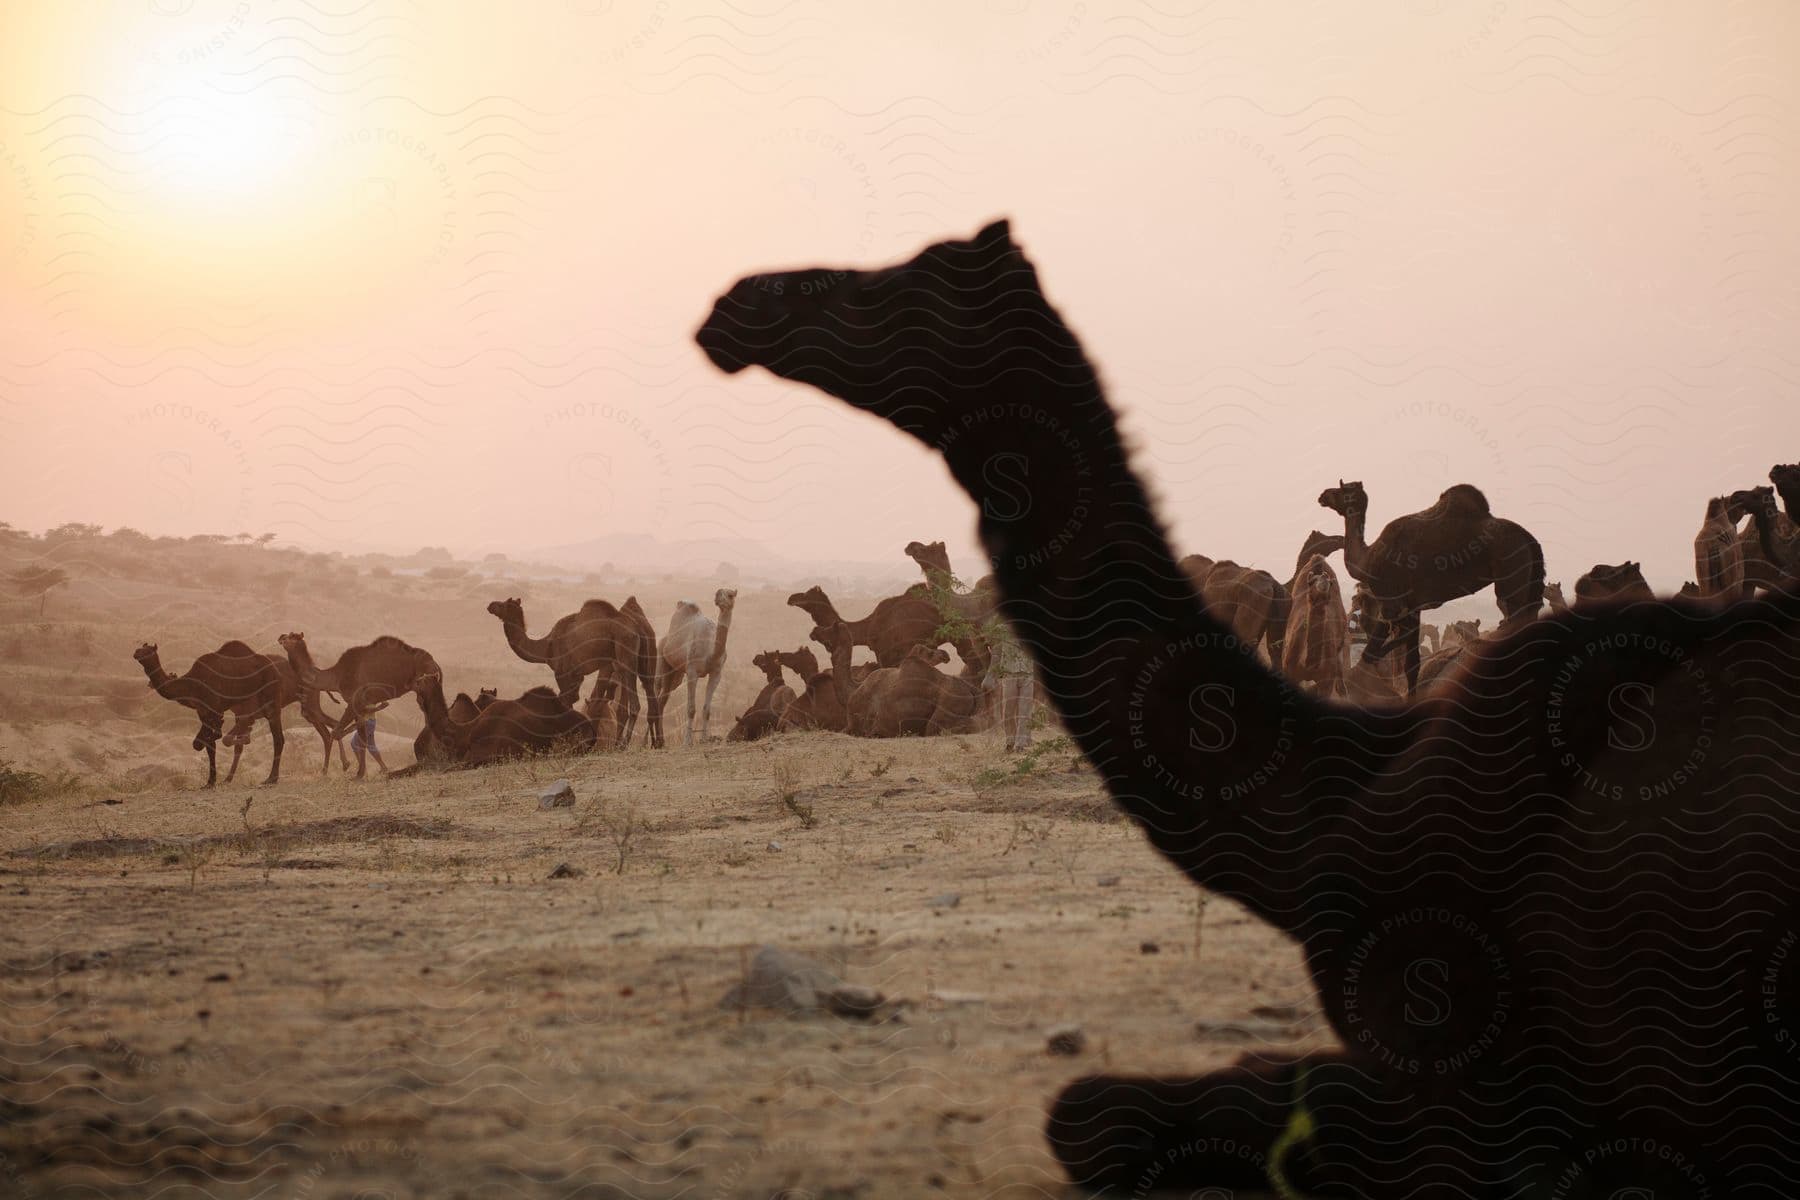 A silhouette of a camel stands out against a sunset backdrop with other camels in the background